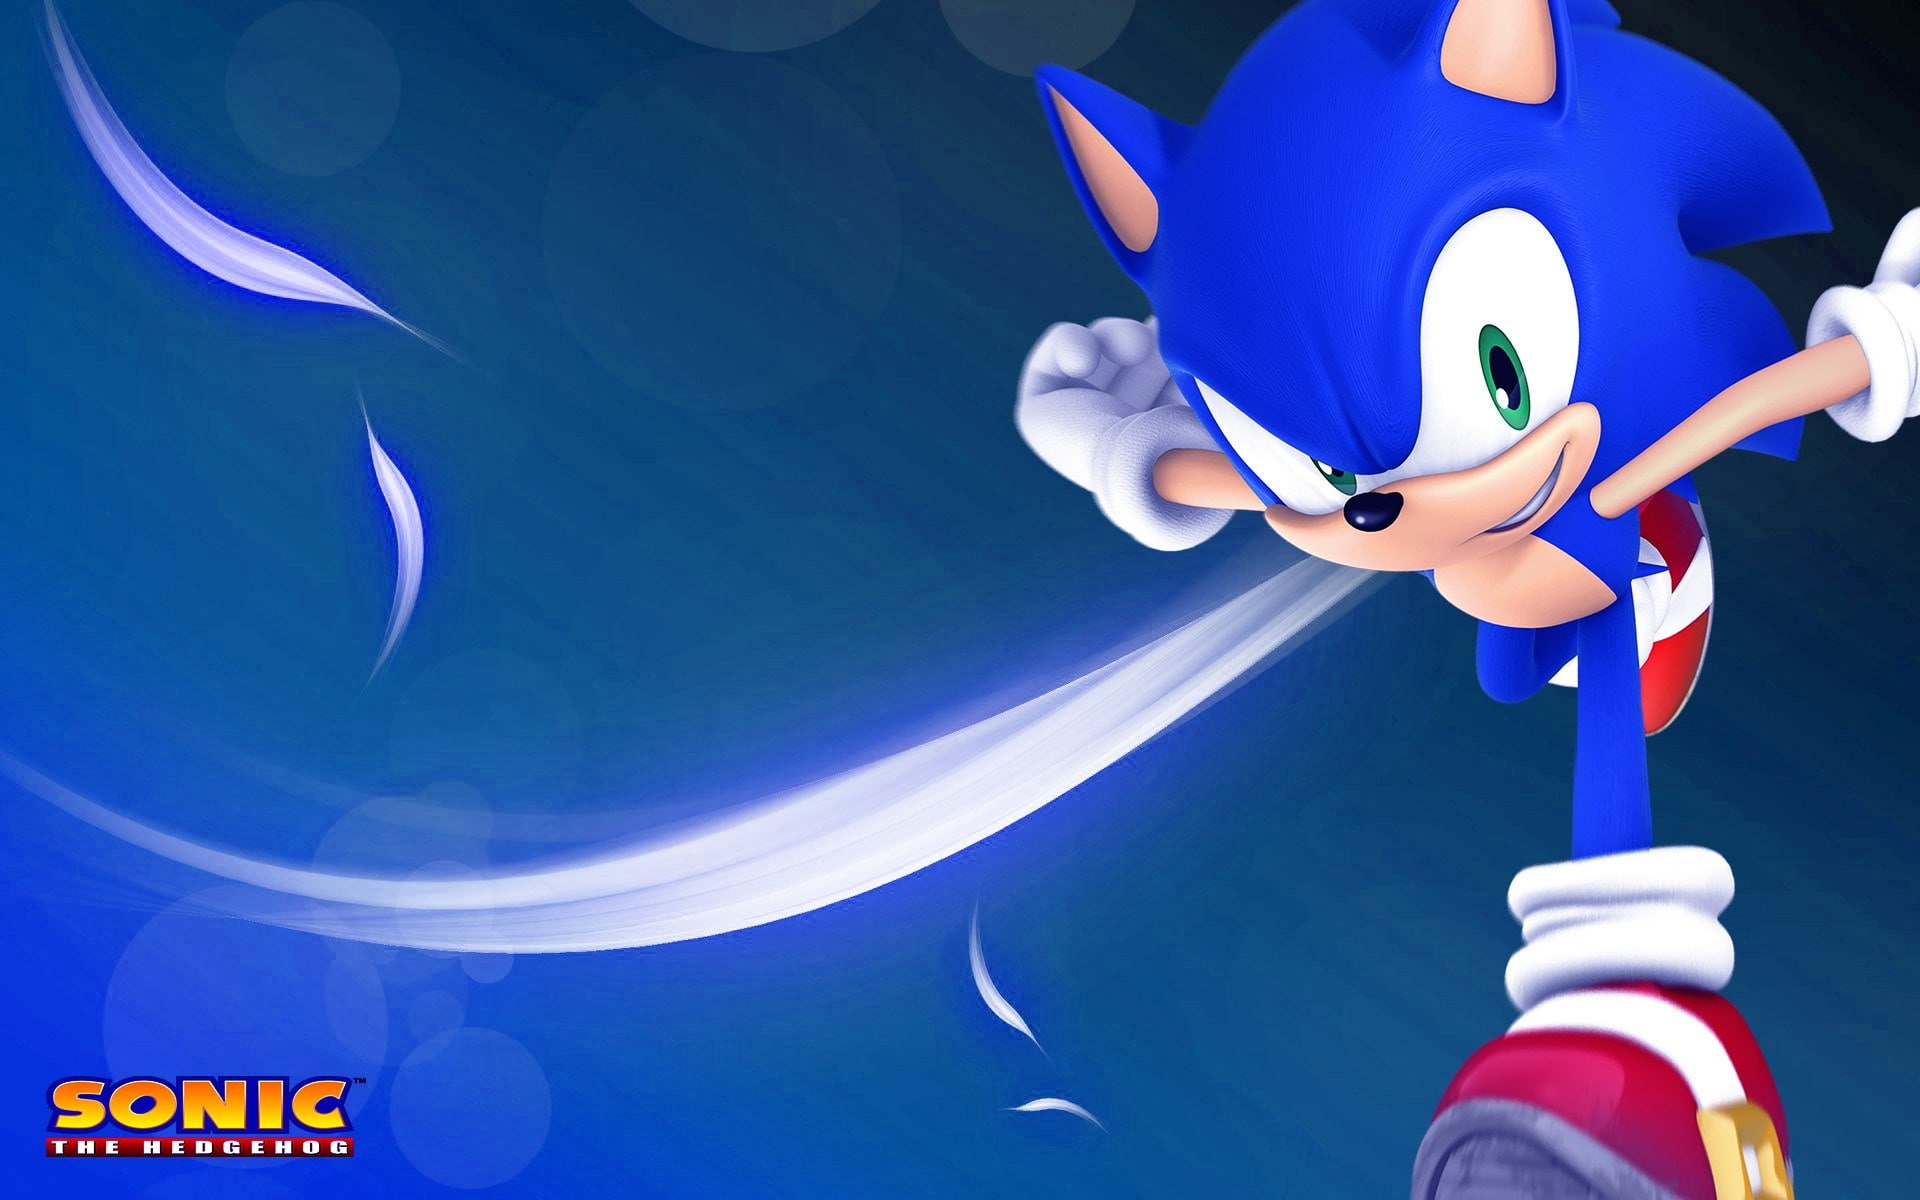 5. Sonic the Hedgehog: Blue Hair and LGBTQ+ Representation - wide 5